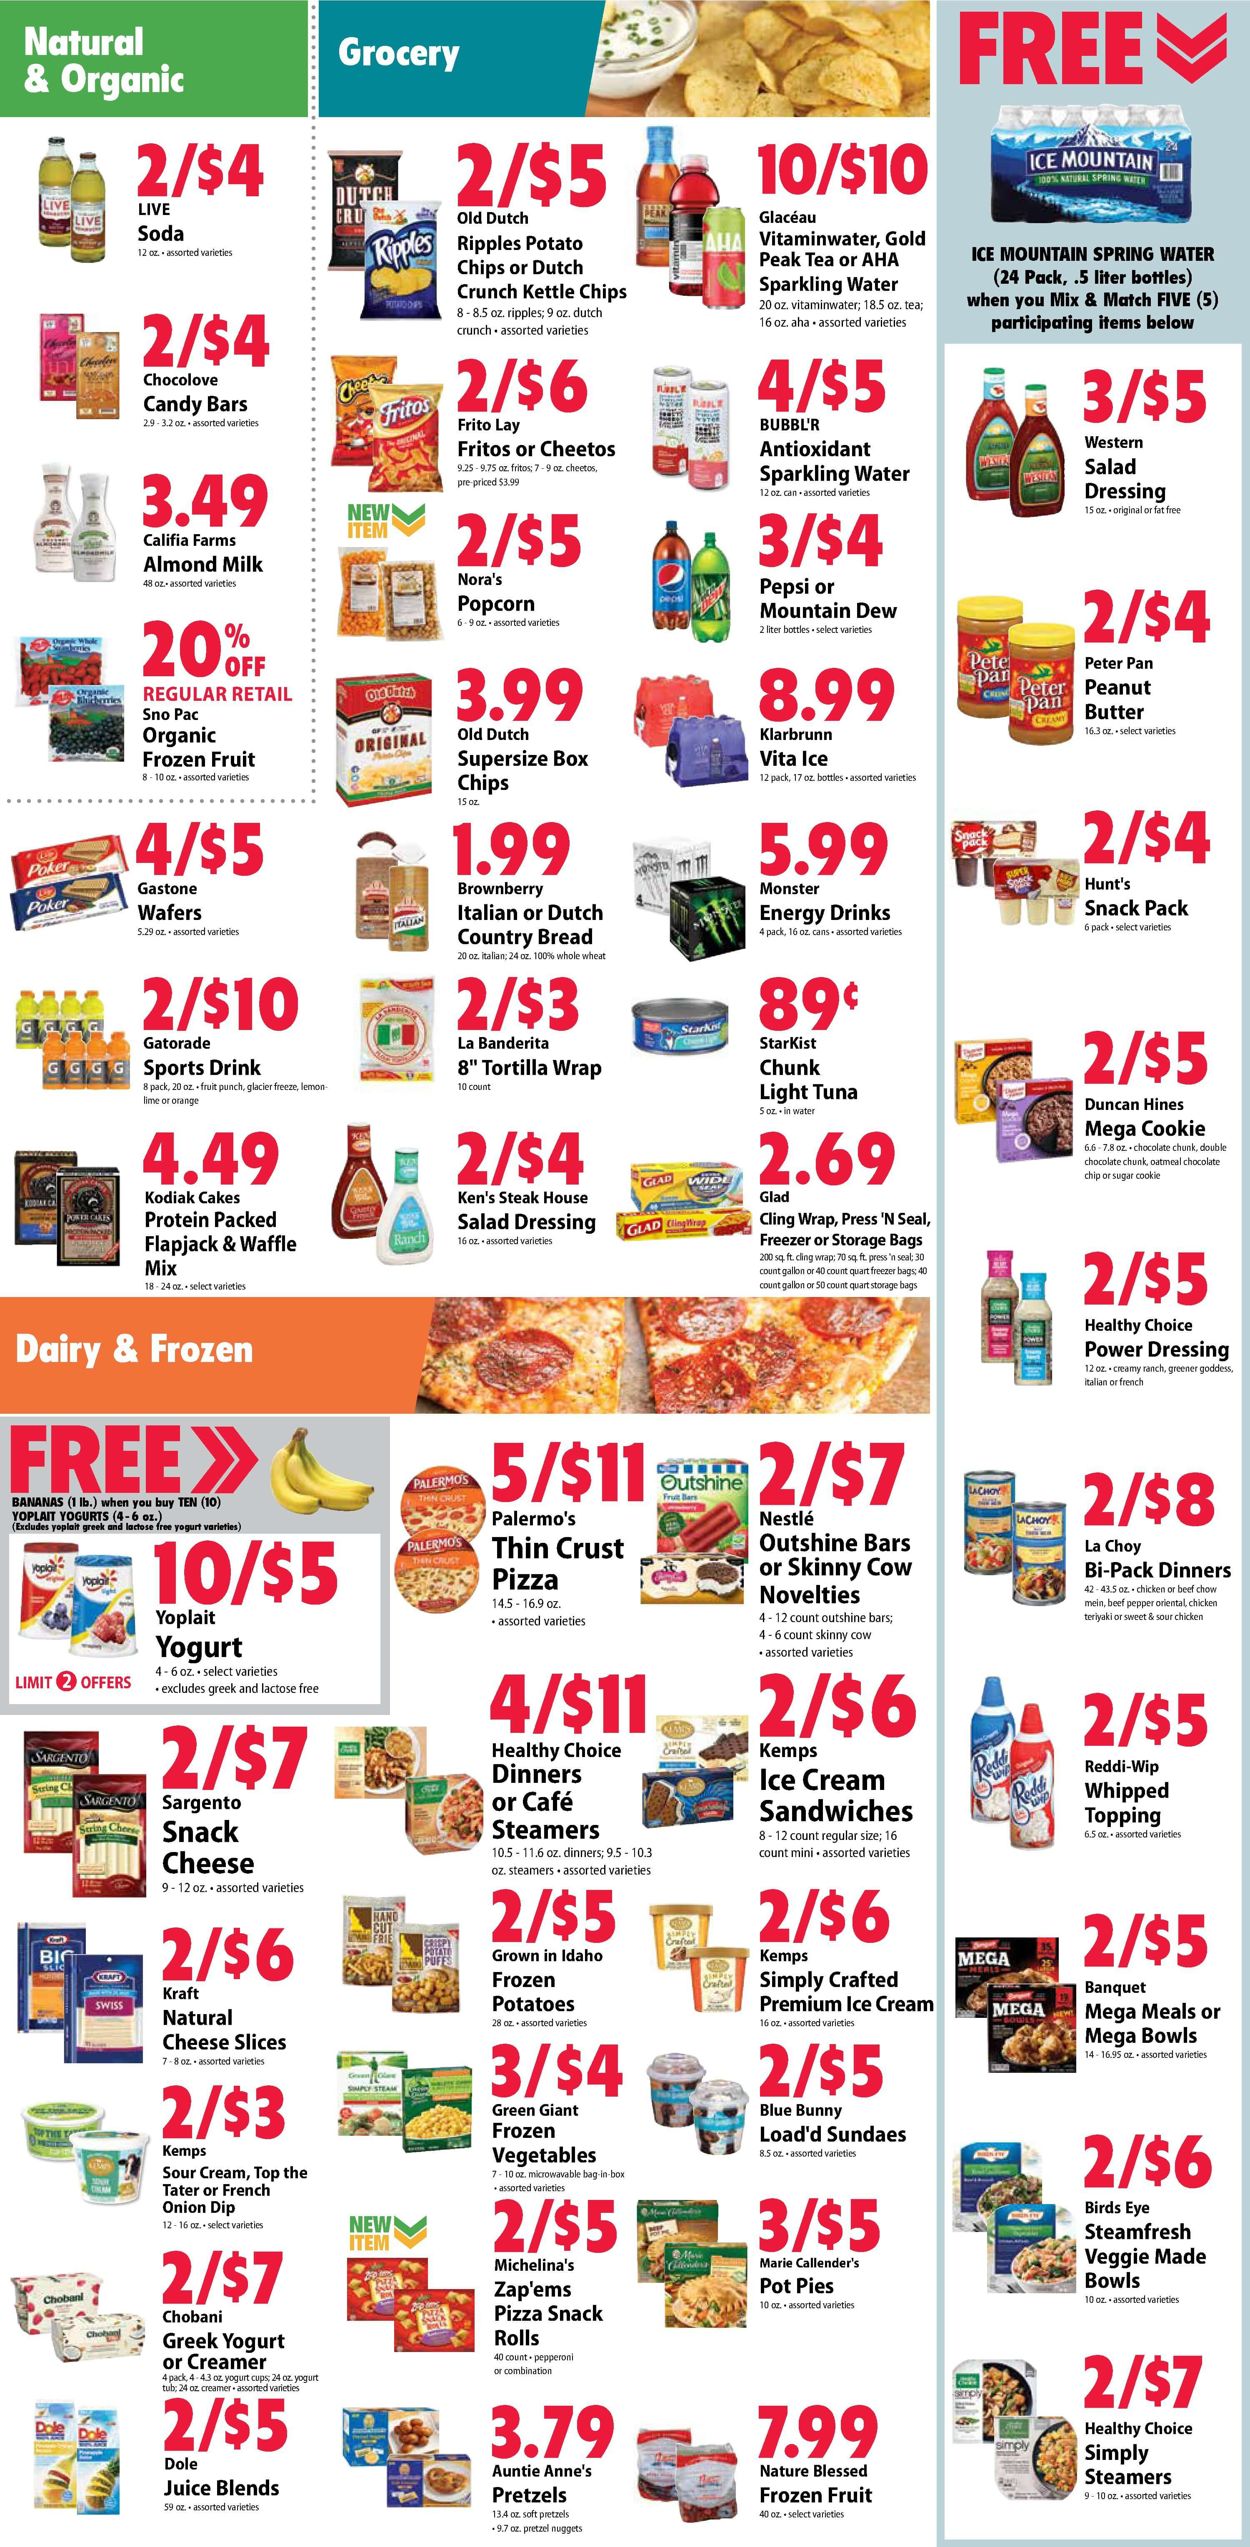 Festival Foods Weekly Ad Circular - valid 08/12-08/18/2020 (Page 4)